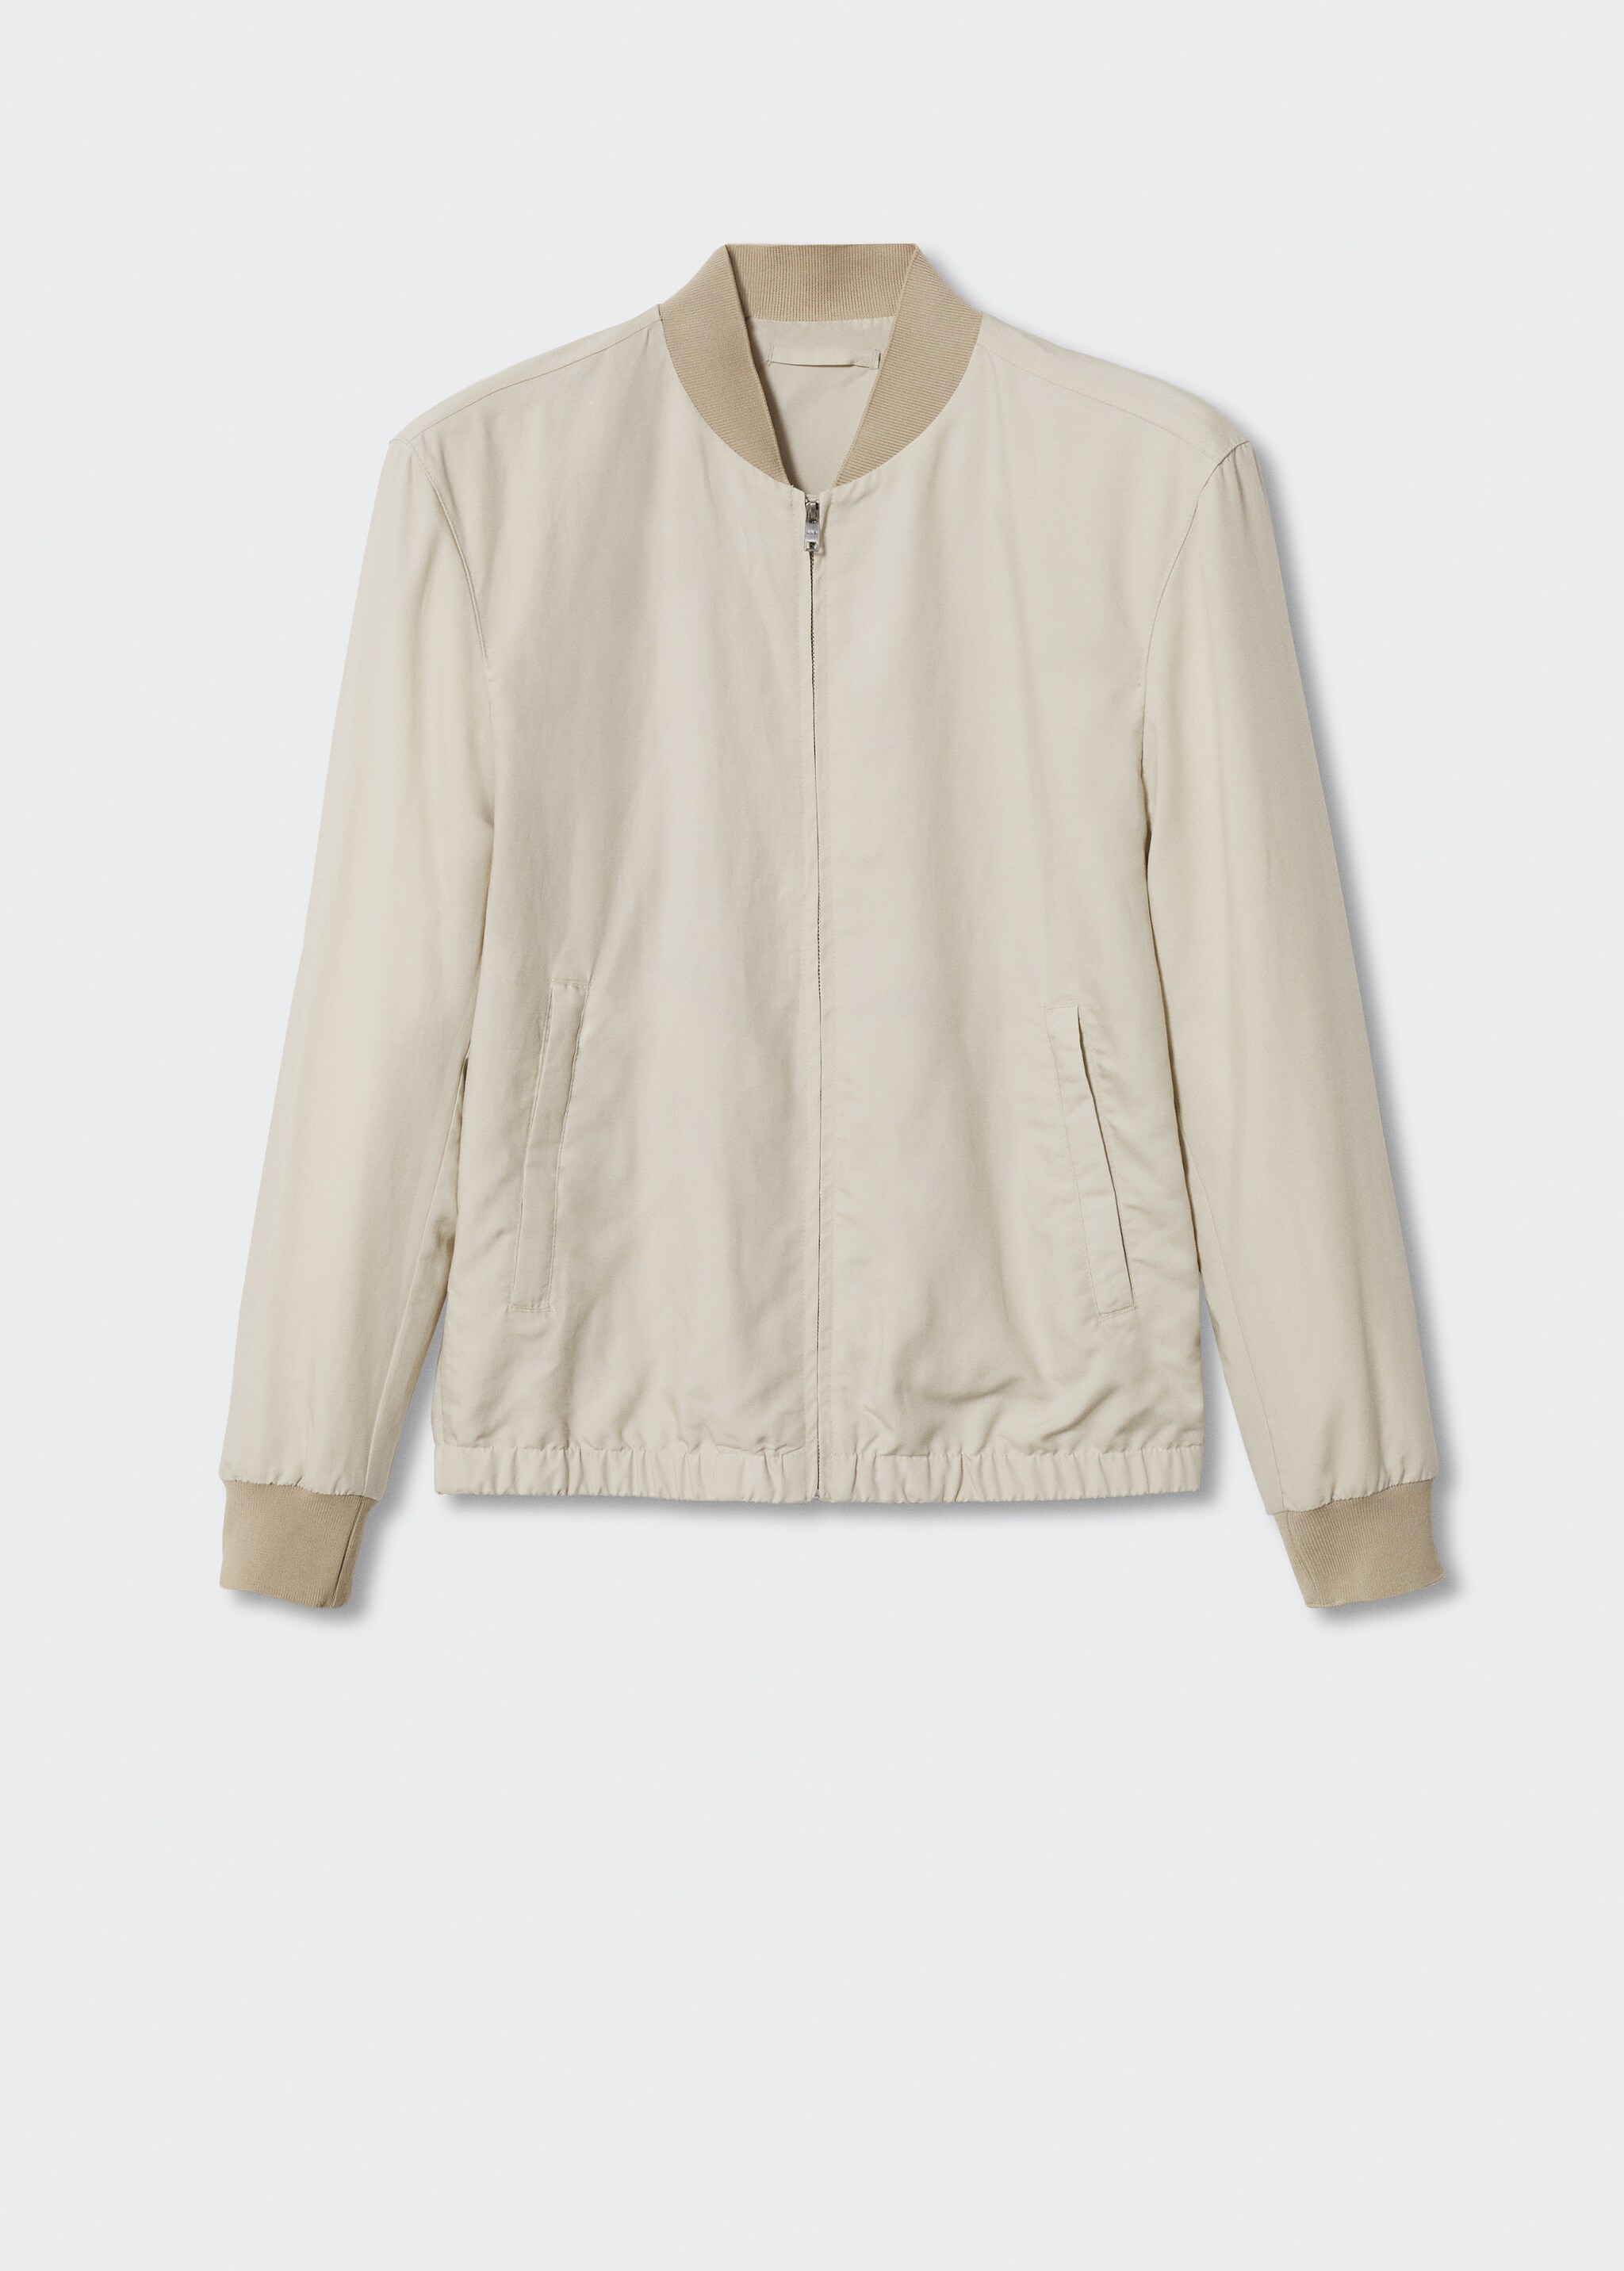 Tencel linen bomber jacket - Article without model